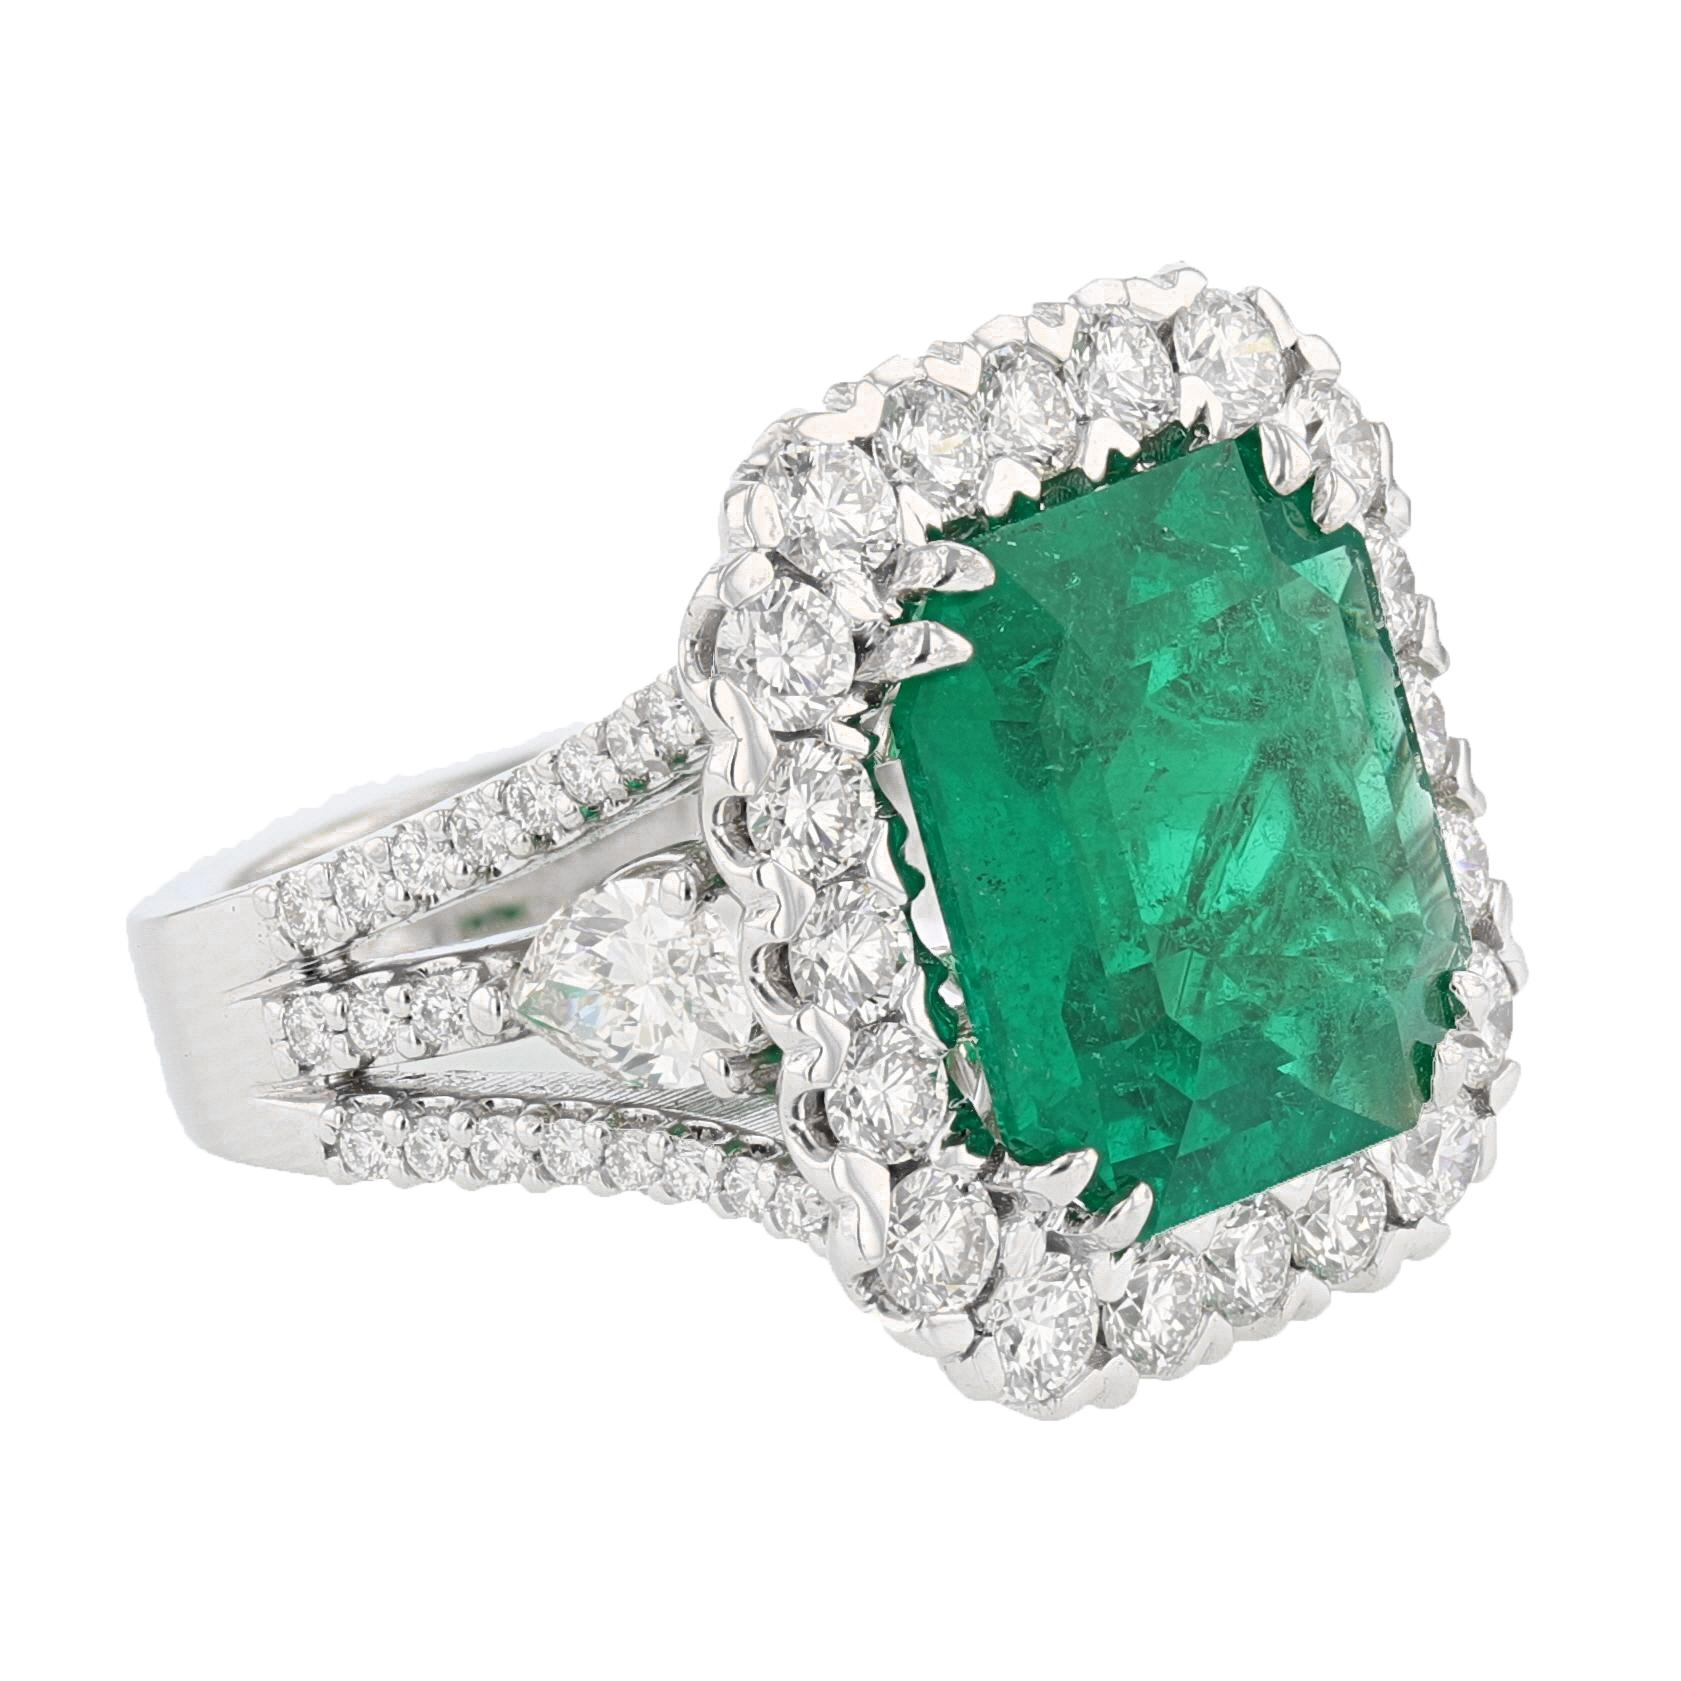 This ring is made in 18 karat white gold and features a 10.08ct Colombian emerald cut emerald with a Gia certificate. The Certificate number is 